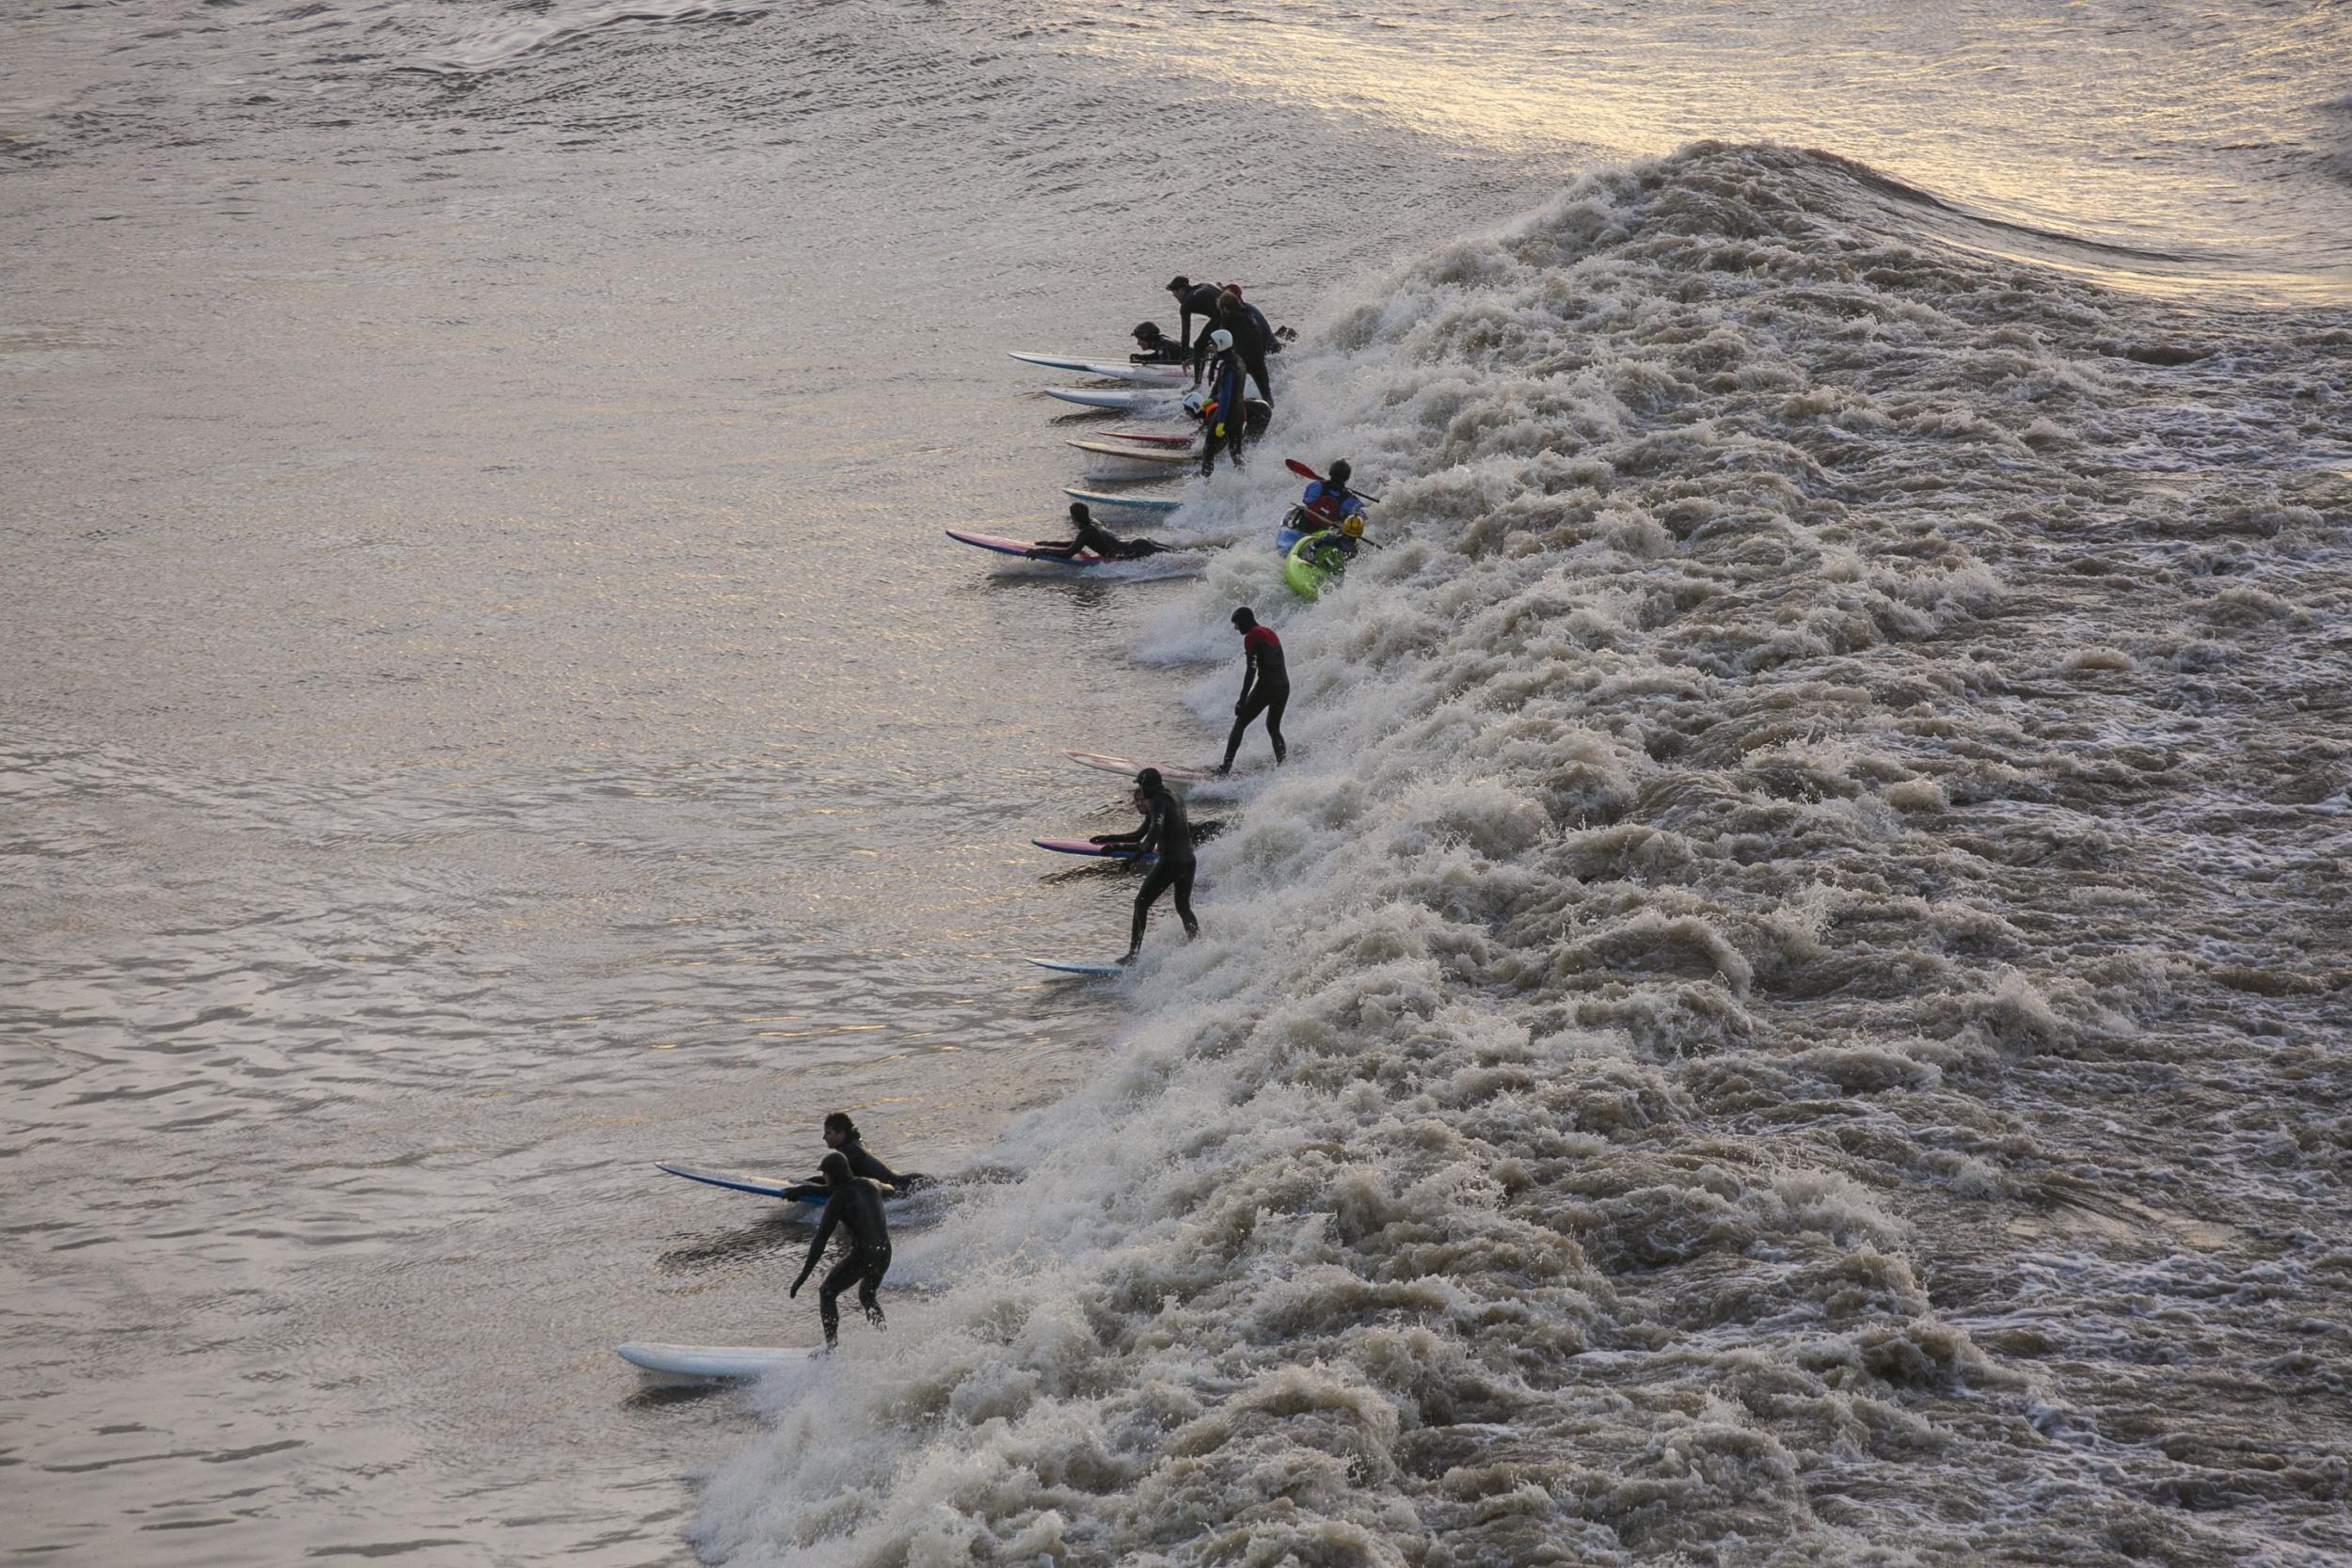 The Severn Bore in Gloucestershire propels surfers at up to 20kmph, with the wave reaching as high as two metres